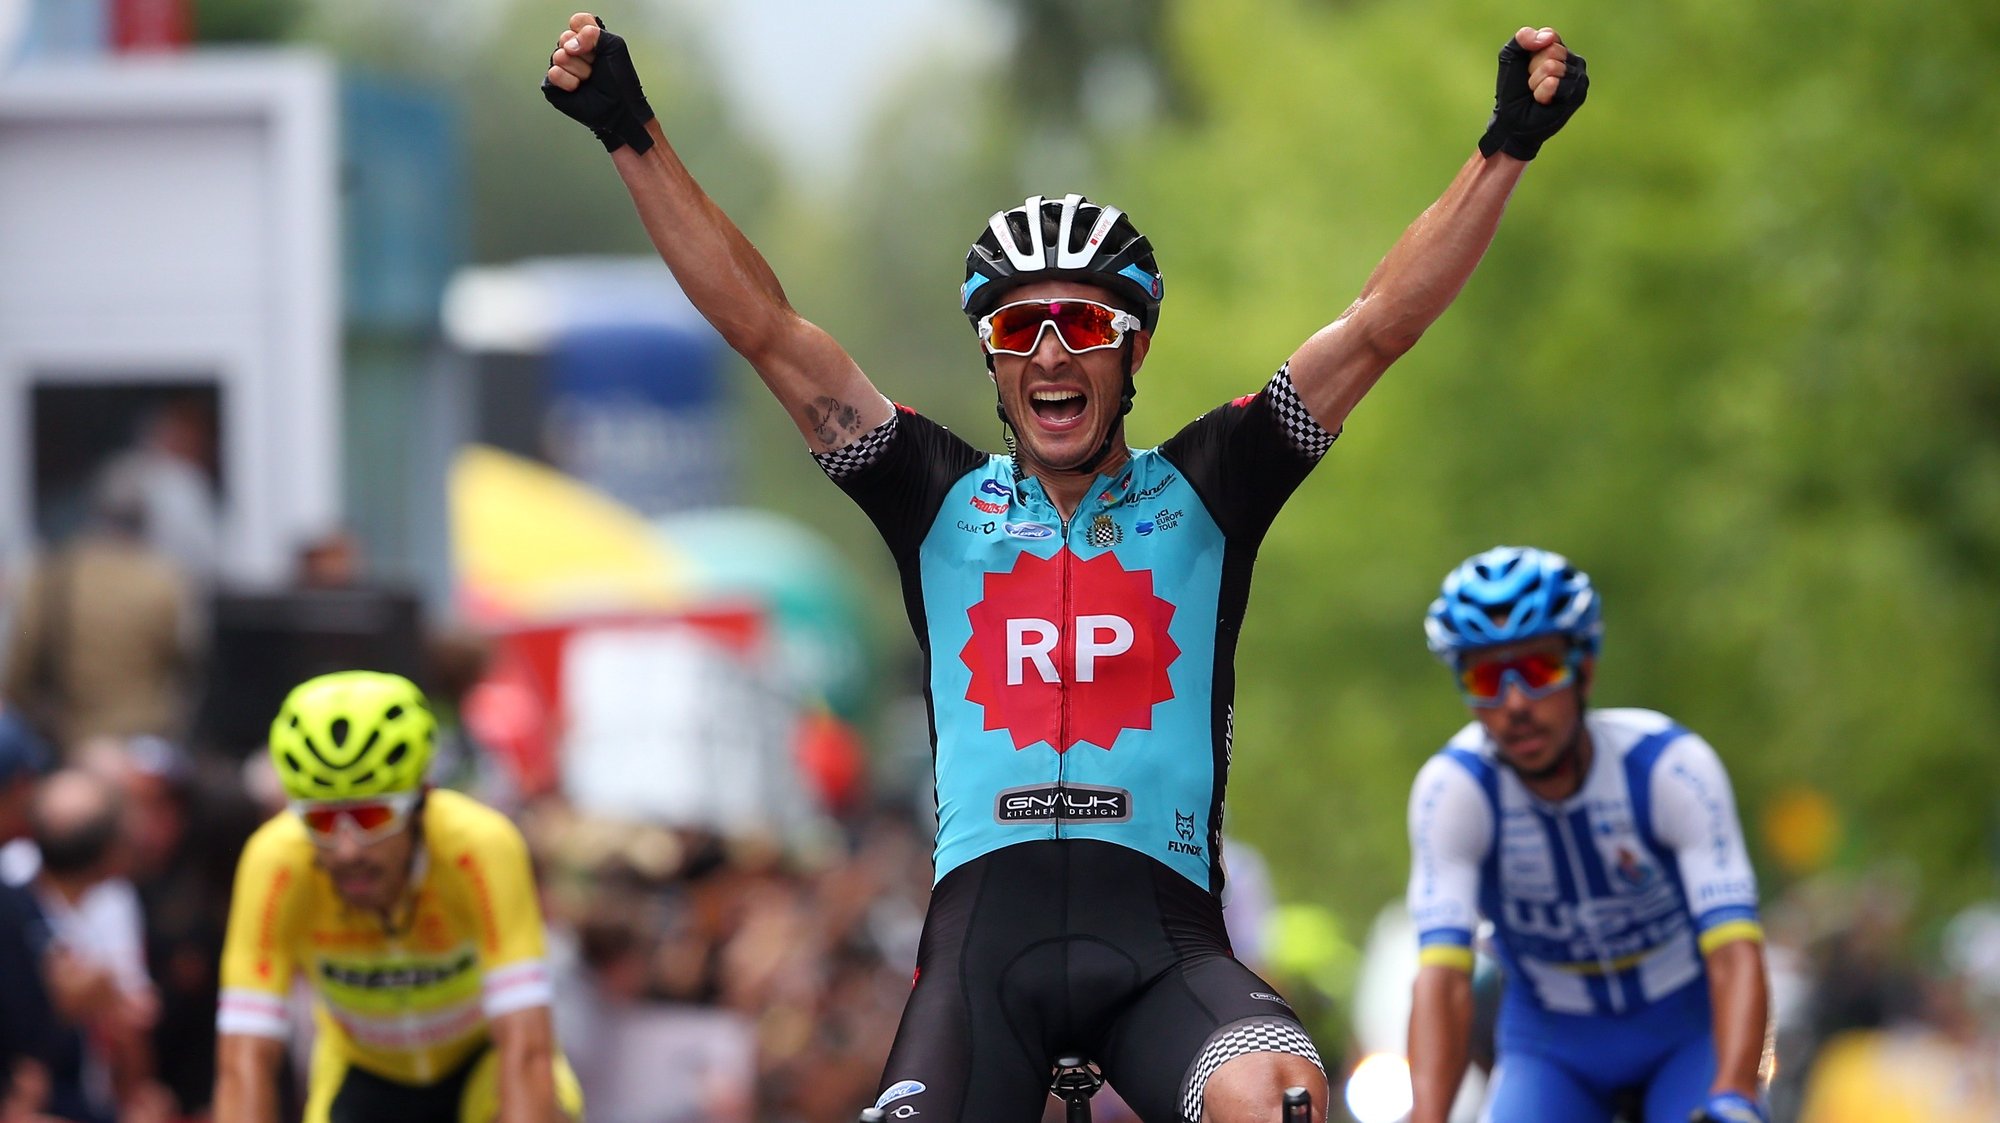 Portuguese rider of Radio Popular - Boavista team Joao Benta celebrates after winning the octave stage of the 81th CyclingTour of Portugal over 156,6 km between Viana do Castelo and Felgueiras, Portugal, 09th August 2019. NUNO VEIGA/LUSA